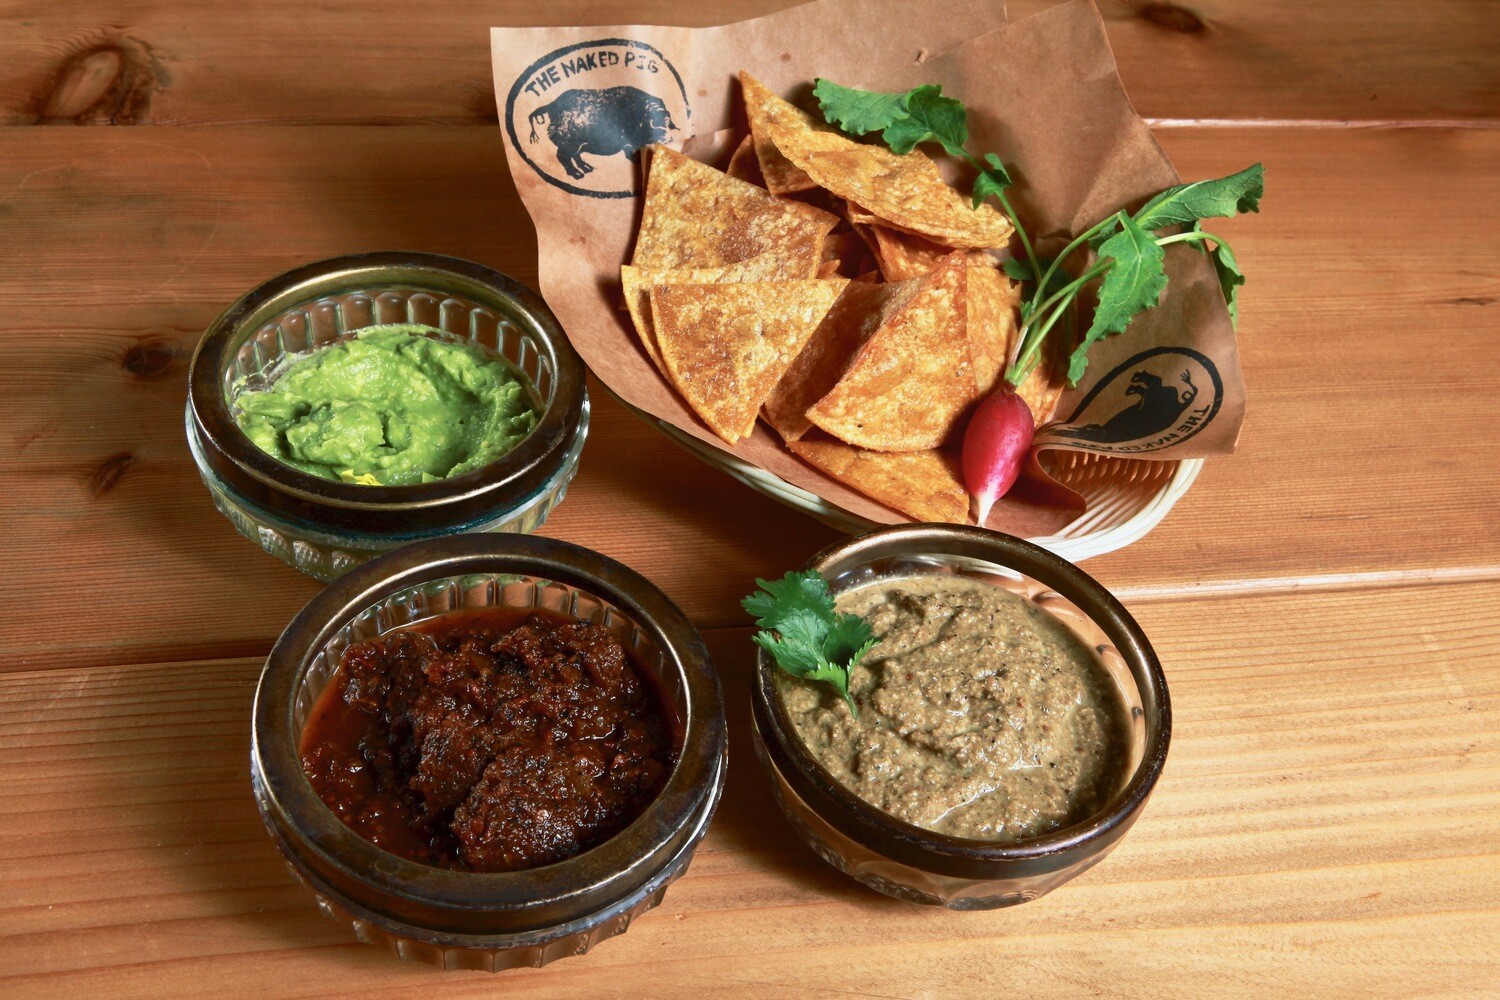 House Salsas & chips for the table